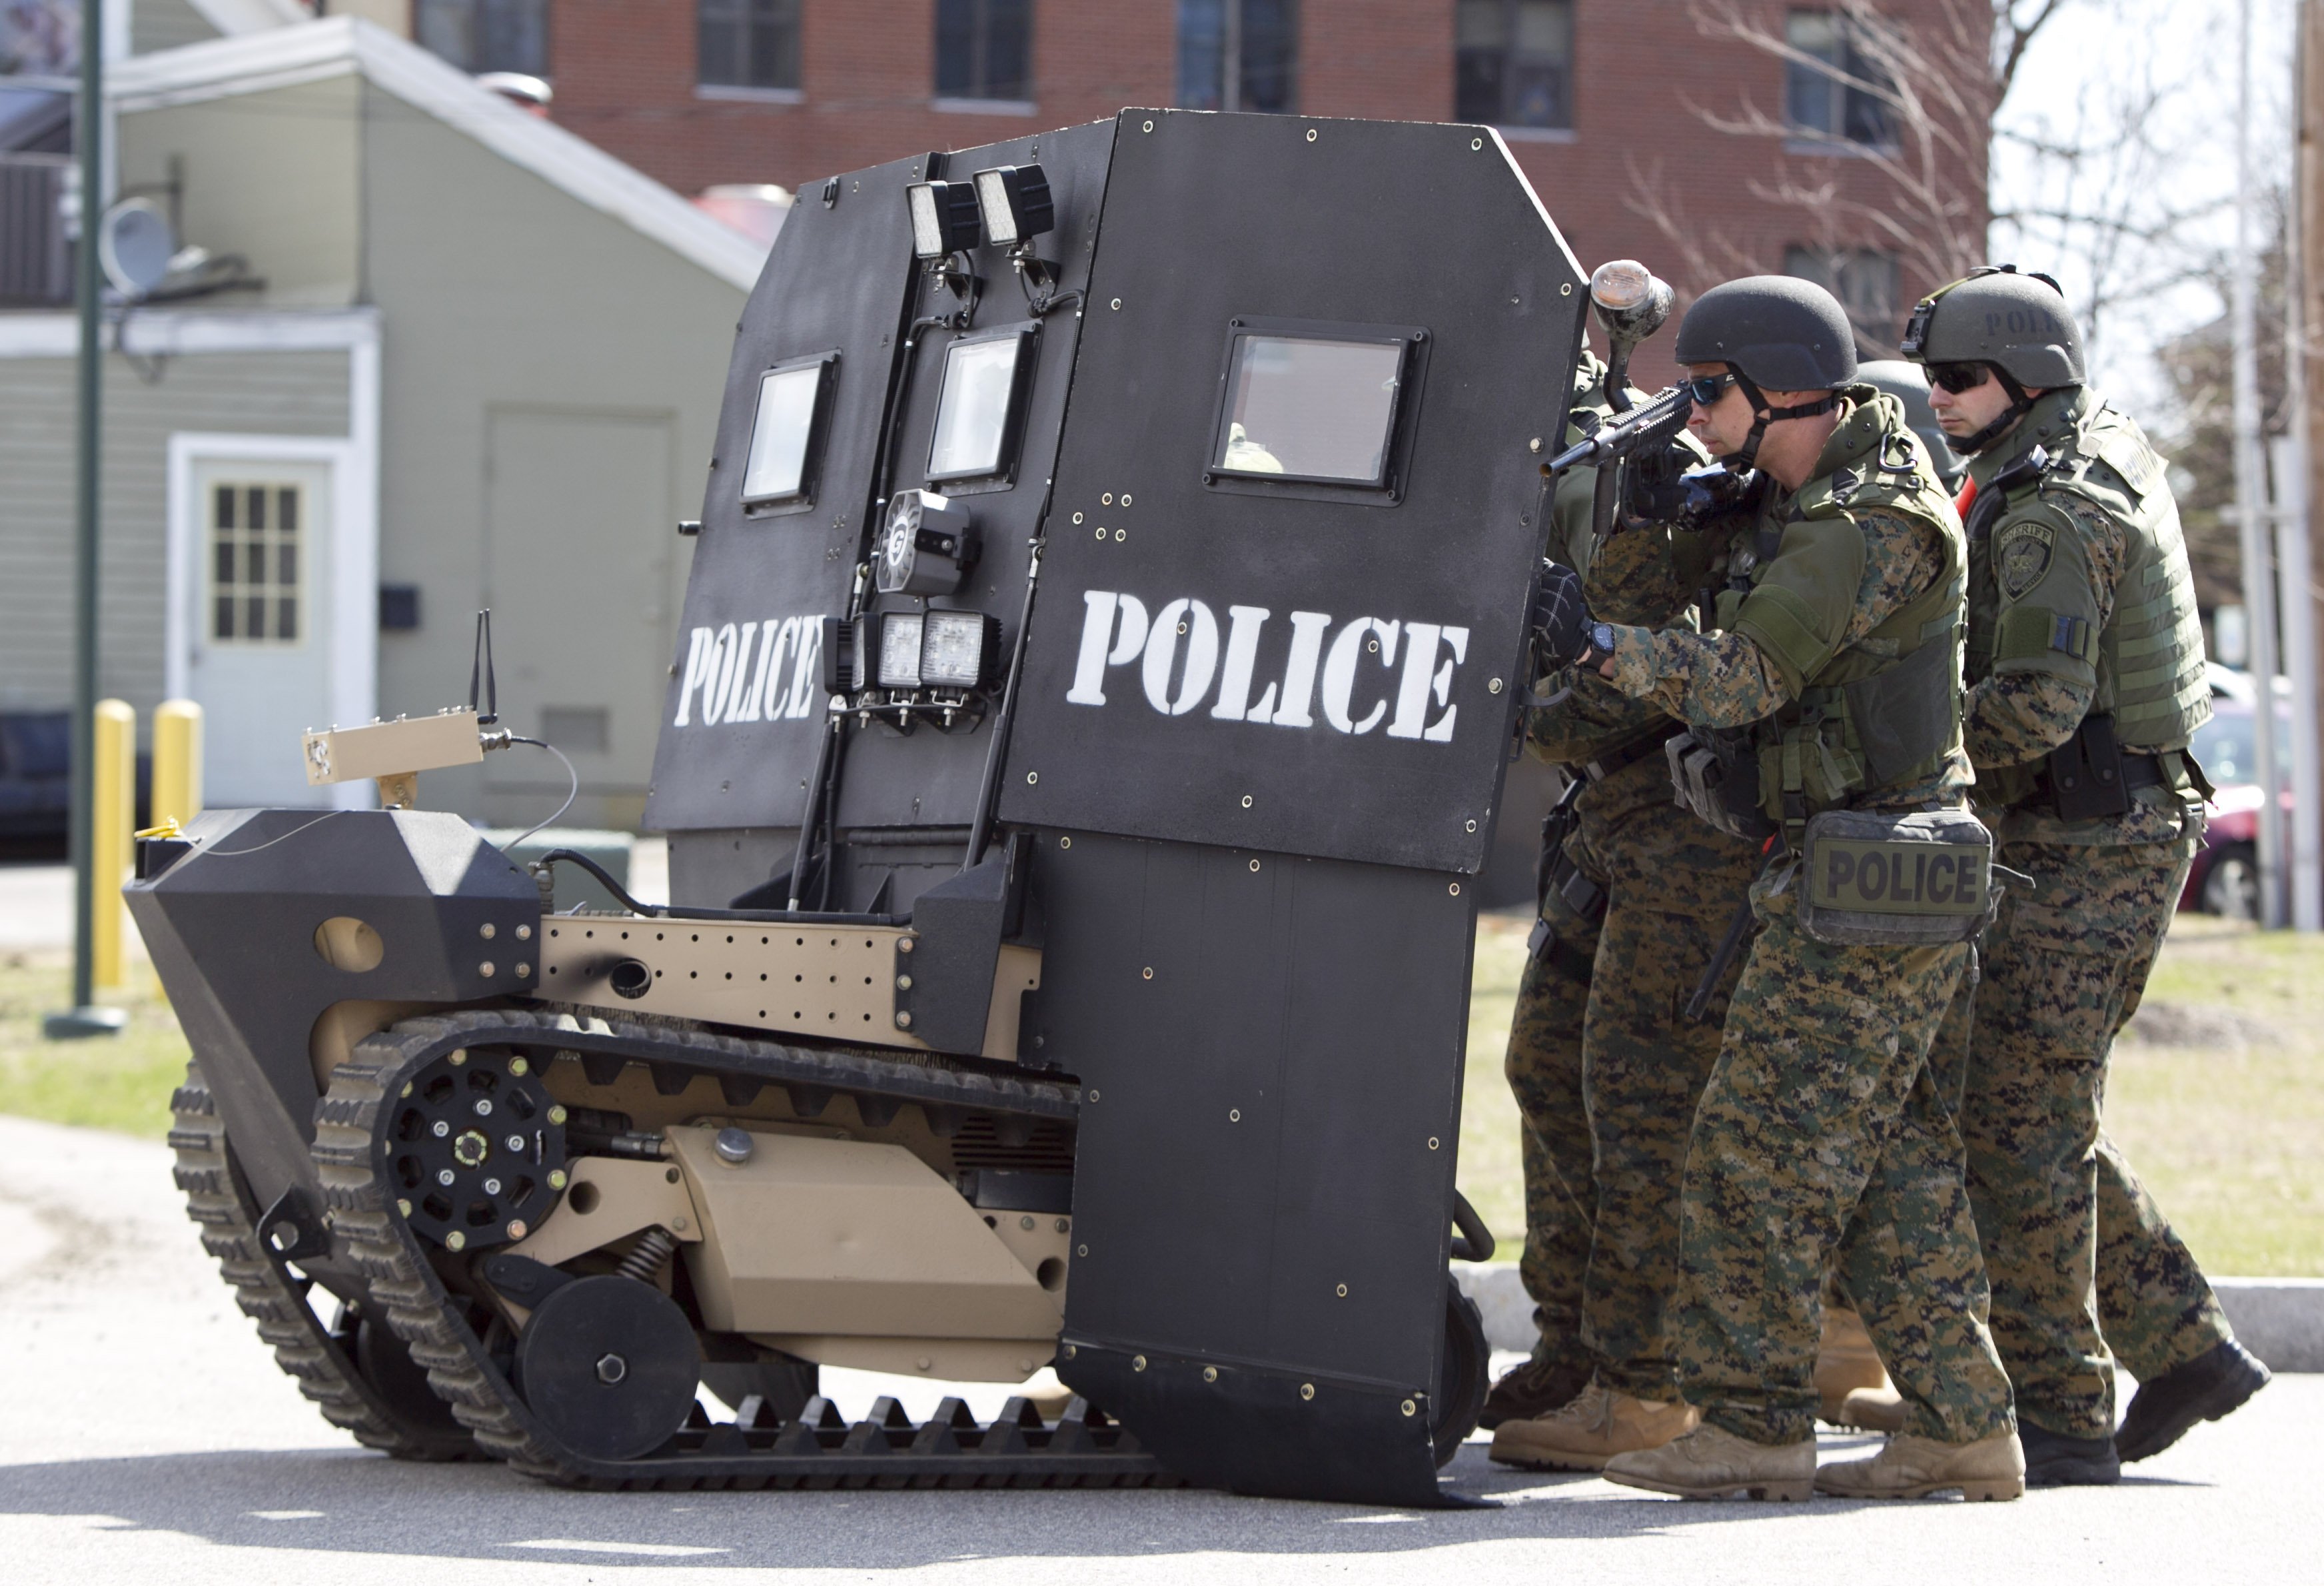 A SWAT robot, a remote-controlled small tank-like vehicle with a shield for officers, is demonstrated for the media in Sanford, Maine on Thursday, April 18, 2013. Howe & Howe Technologies, a Waterboro, Maine company, says their device keeps SWAT teams and other first responders safe in standoffs and while confronting armed suspects. Police now typically use hand-held shields when storming a building. (AP Photo/Robert F. Bukaty)